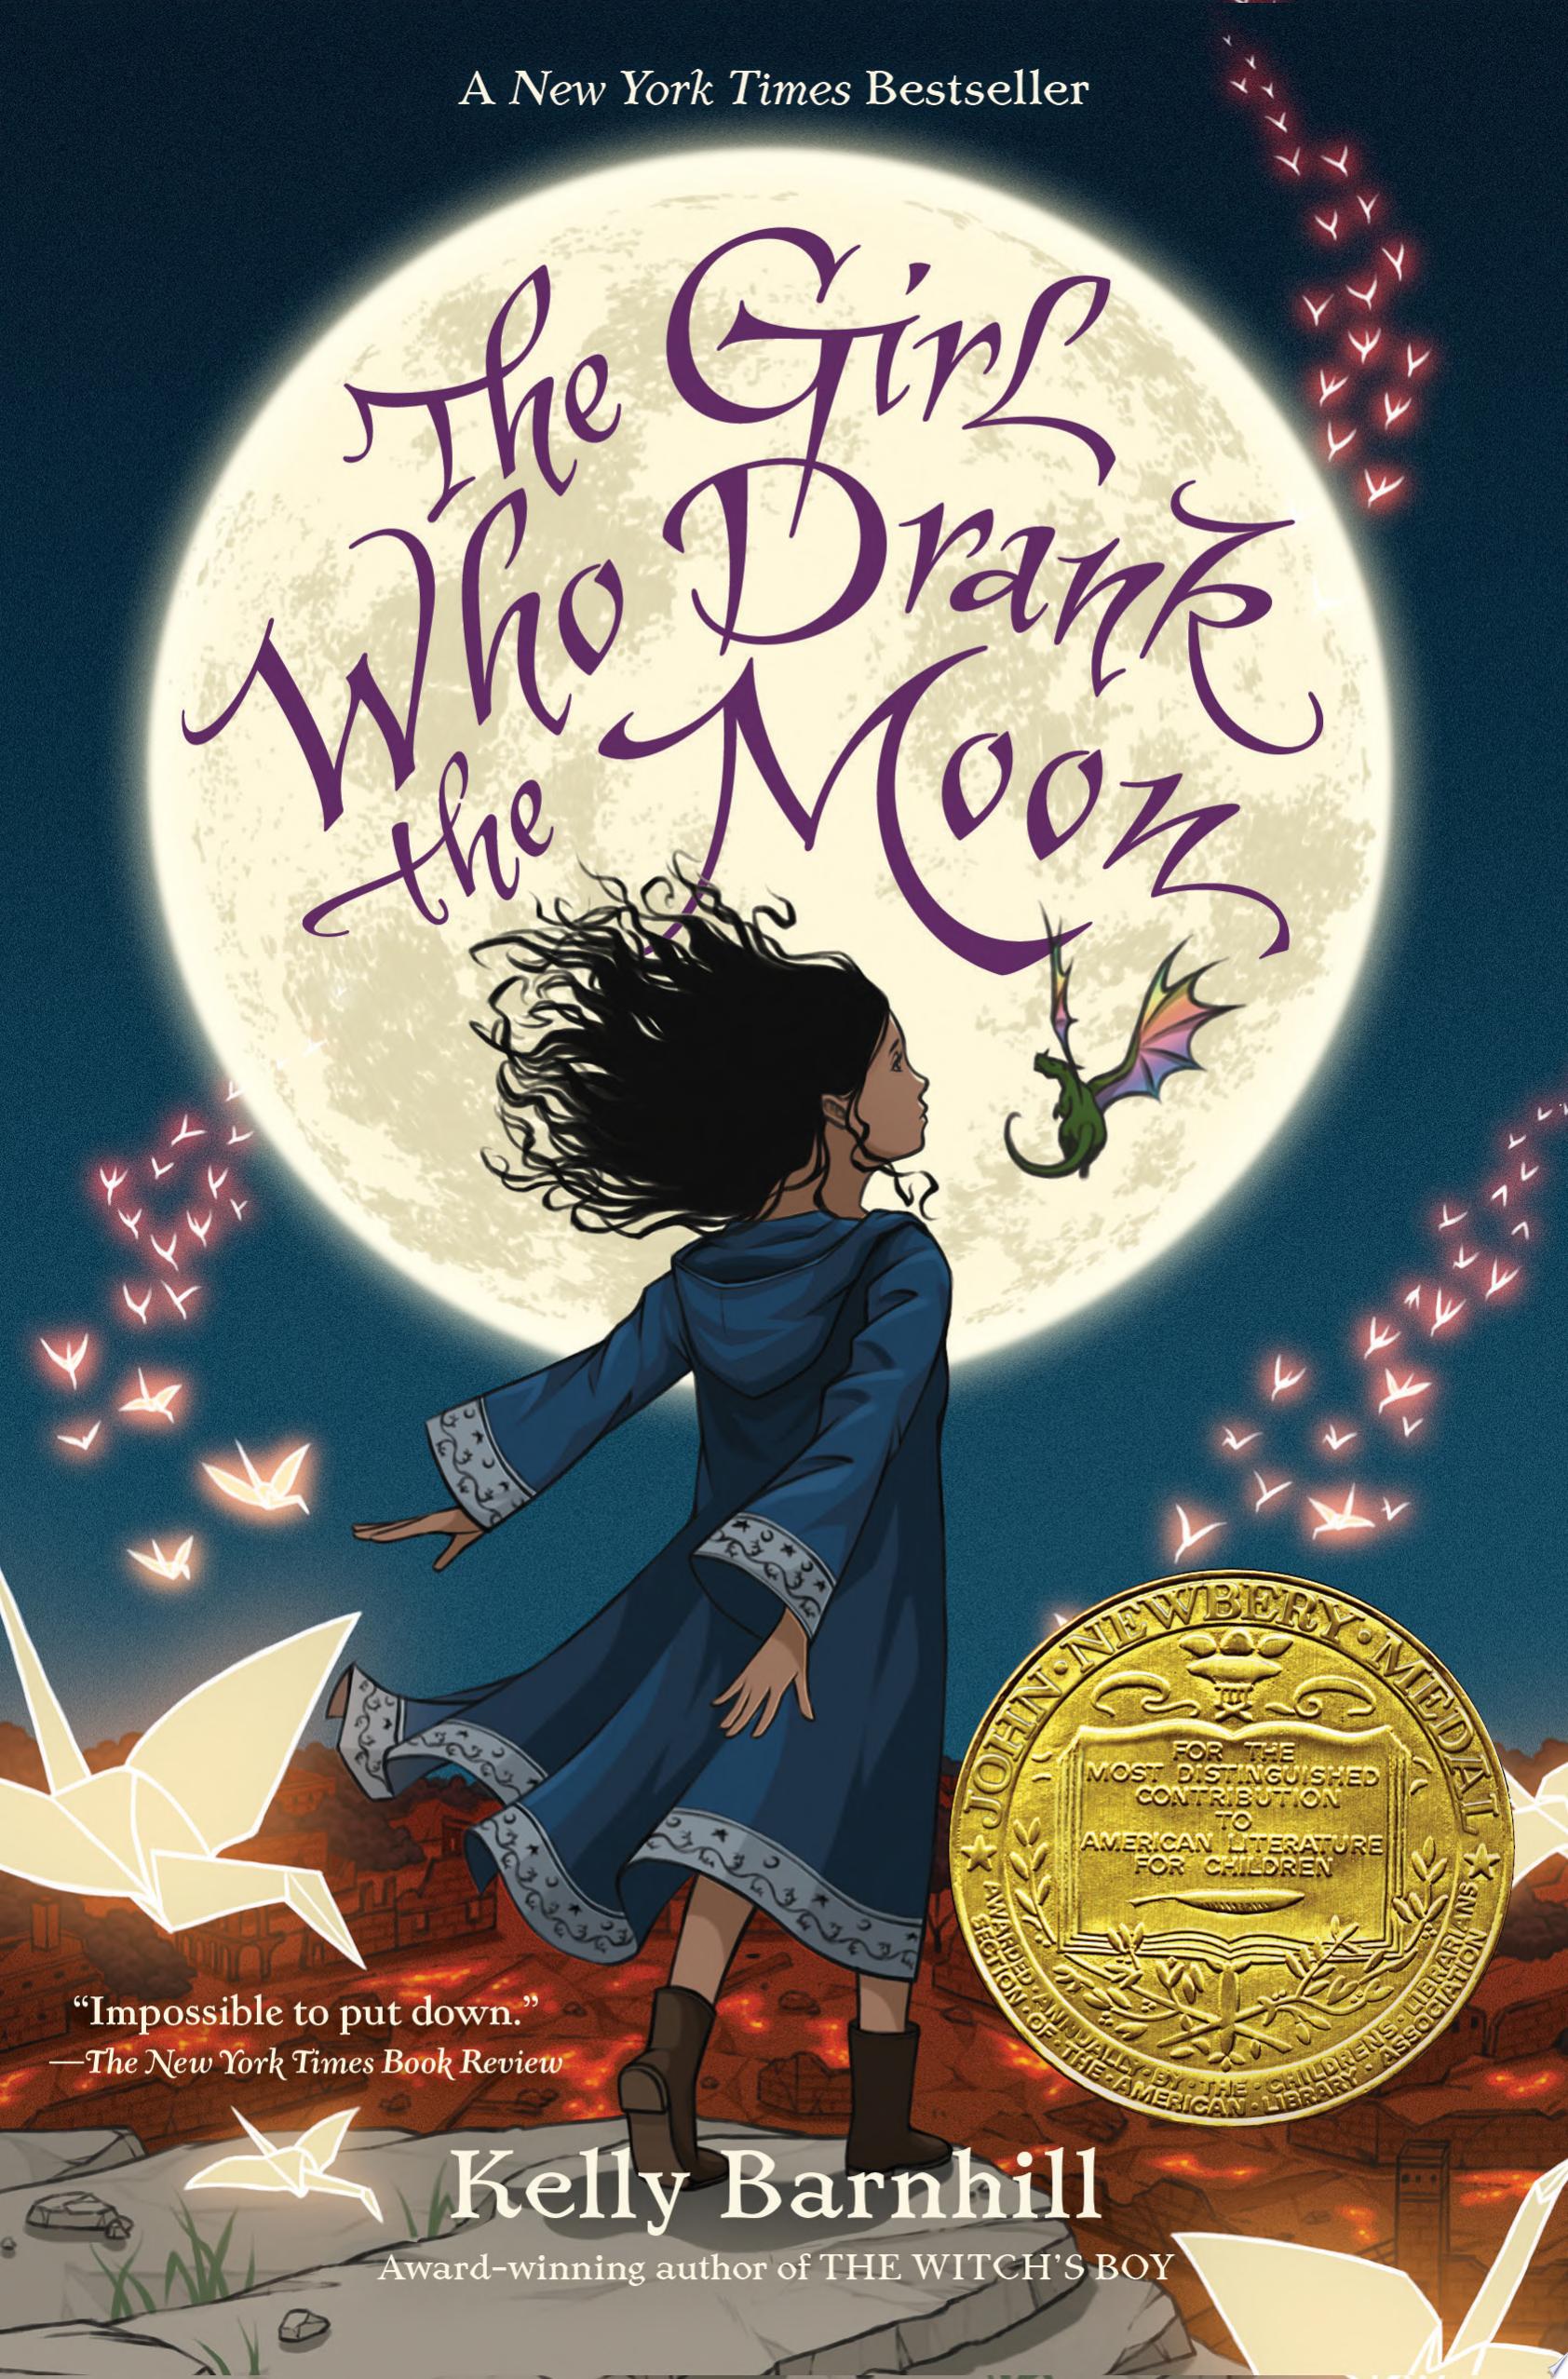 Image for "The Girl Who Drank the Moon"